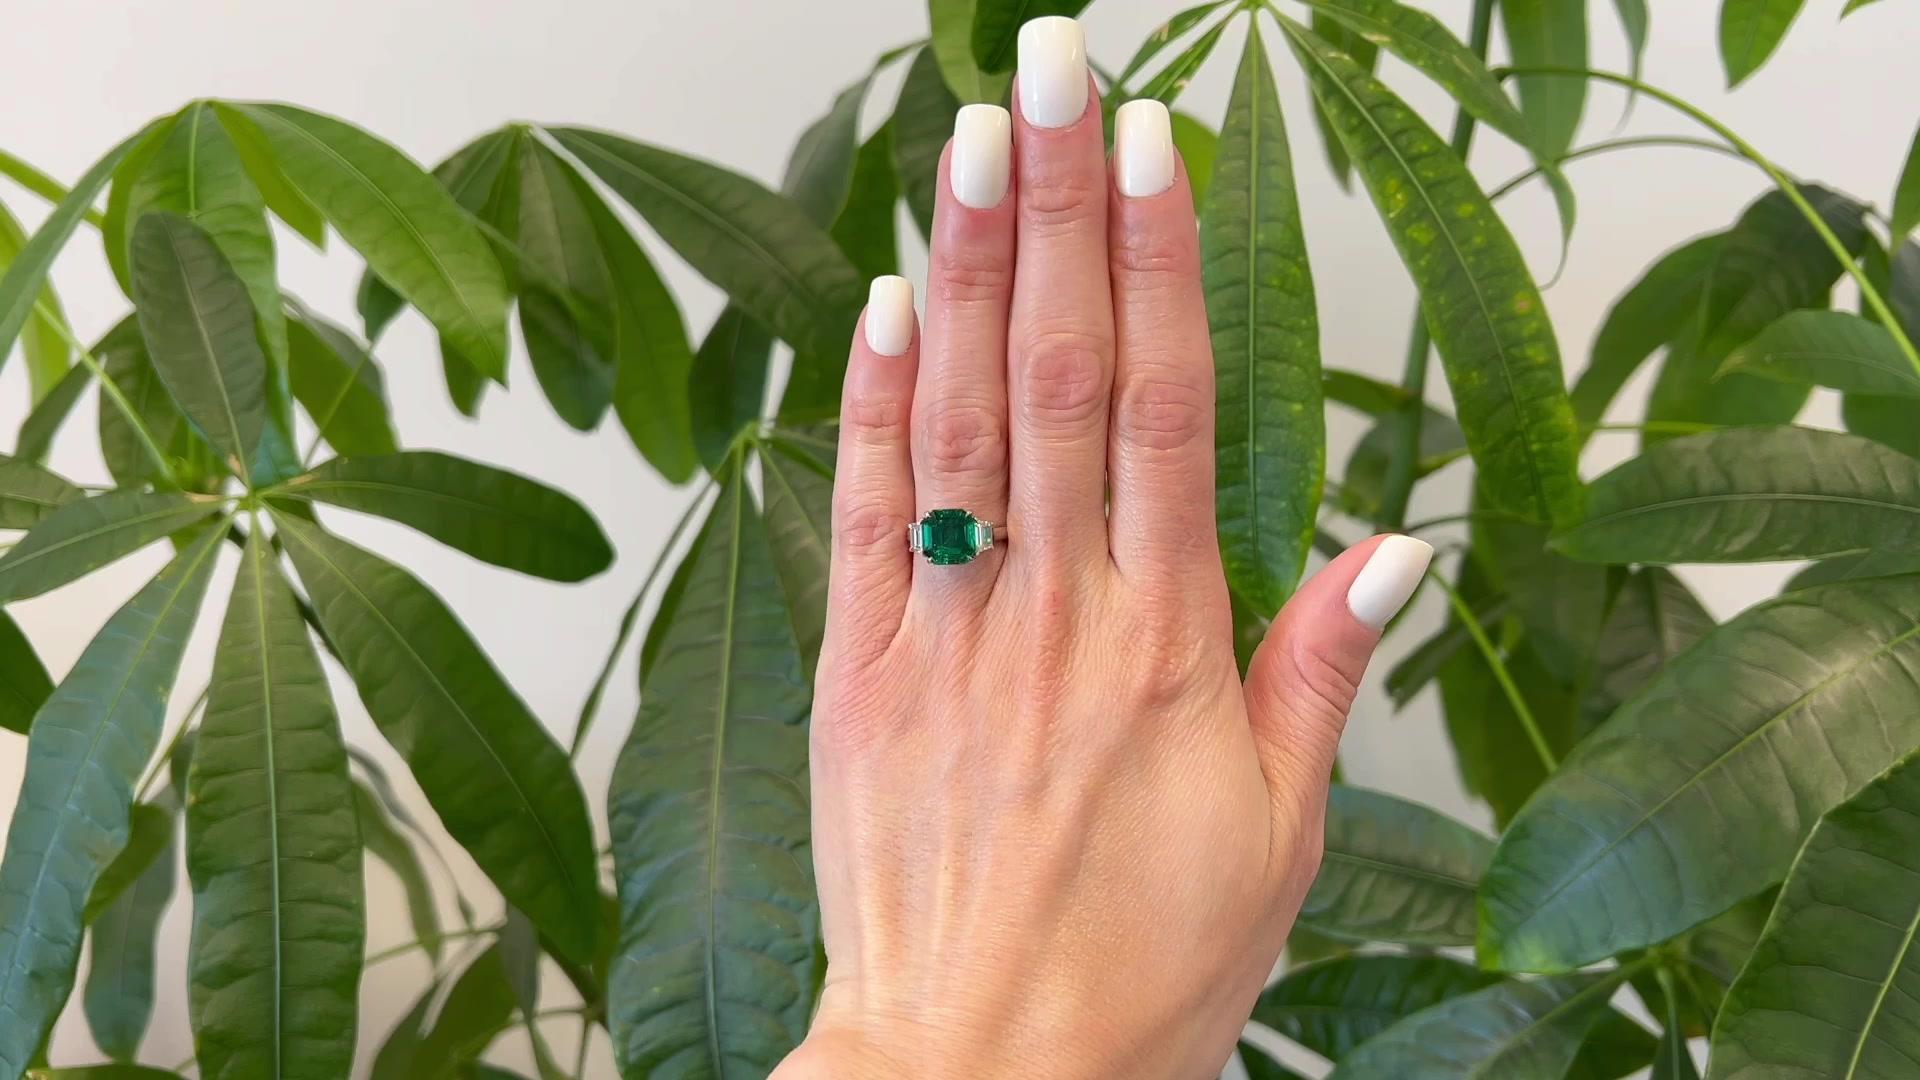 One Vintage AGL SSEF 2.51 Carats Colombian Emerald Diamond Platinum Ring. Featuring one AGL and SSEF certified octagonal step cut emerald of 2.51 carats, accompanied with AGL #1129374 and SSEF #109918 stating the emerald is of Colombian origin and